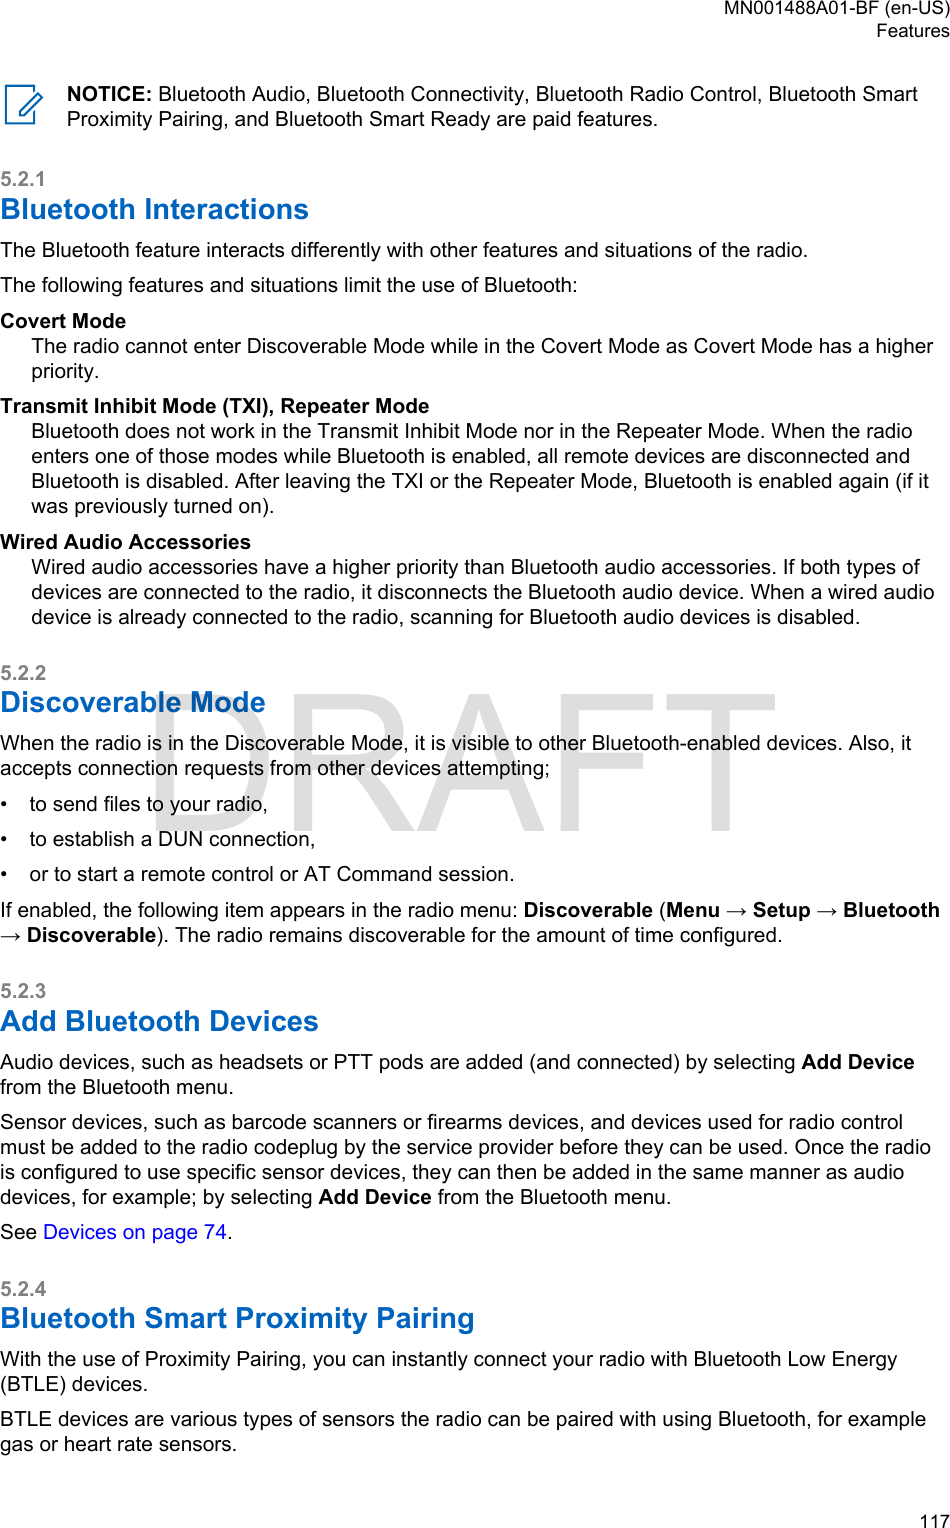 NOTICE: Bluetooth Audio, Bluetooth Connectivity, Bluetooth Radio Control, Bluetooth SmartProximity Pairing, and Bluetooth Smart Ready are paid features.5.2.1Bluetooth InteractionsThe Bluetooth feature interacts differently with other features and situations of the radio.The following features and situations limit the use of Bluetooth:Covert ModeThe radio cannot enter Discoverable Mode while in the Covert Mode as Covert Mode has a higherpriority.Transmit Inhibit Mode (TXI), Repeater ModeBluetooth does not work in the Transmit Inhibit Mode nor in the Repeater Mode. When the radioenters one of those modes while Bluetooth is enabled, all remote devices are disconnected andBluetooth is disabled. After leaving the TXI or the Repeater Mode, Bluetooth is enabled again (if itwas previously turned on).Wired Audio AccessoriesWired audio accessories have a higher priority than Bluetooth audio accessories. If both types ofdevices are connected to the radio, it disconnects the Bluetooth audio device. When a wired audiodevice is already connected to the radio, scanning for Bluetooth audio devices is disabled.5.2.2Discoverable ModeWhen the radio is in the Discoverable Mode, it is visible to other Bluetooth-enabled devices. Also, itaccepts connection requests from other devices attempting;•to send files to your radio,• to establish a DUN connection,• or to start a remote control or AT Command session.If enabled, the following item appears in the radio menu: Discoverable (Menu → Setup → Bluetooth→ Discoverable). The radio remains discoverable for the amount of time configured.5.2.3Add Bluetooth DevicesAudio devices, such as headsets or PTT pods are added (and connected) by selecting Add Devicefrom the Bluetooth menu.Sensor devices, such as barcode scanners or firearms devices, and devices used for radio controlmust be added to the radio codeplug by the service provider before they can be used. Once the radiois configured to use specific sensor devices, they can then be added in the same manner as audiodevices, for example; by selecting Add Device from the Bluetooth menu.See Devices on page 74.5.2.4Bluetooth Smart Proximity PairingWith the use of Proximity Pairing, you can instantly connect your radio with Bluetooth Low Energy(BTLE) devices.BTLE devices are various types of sensors the radio can be paired with using Bluetooth, for examplegas or heart rate sensors.MN001488A01-BF (en-US)Features  117DRAFT